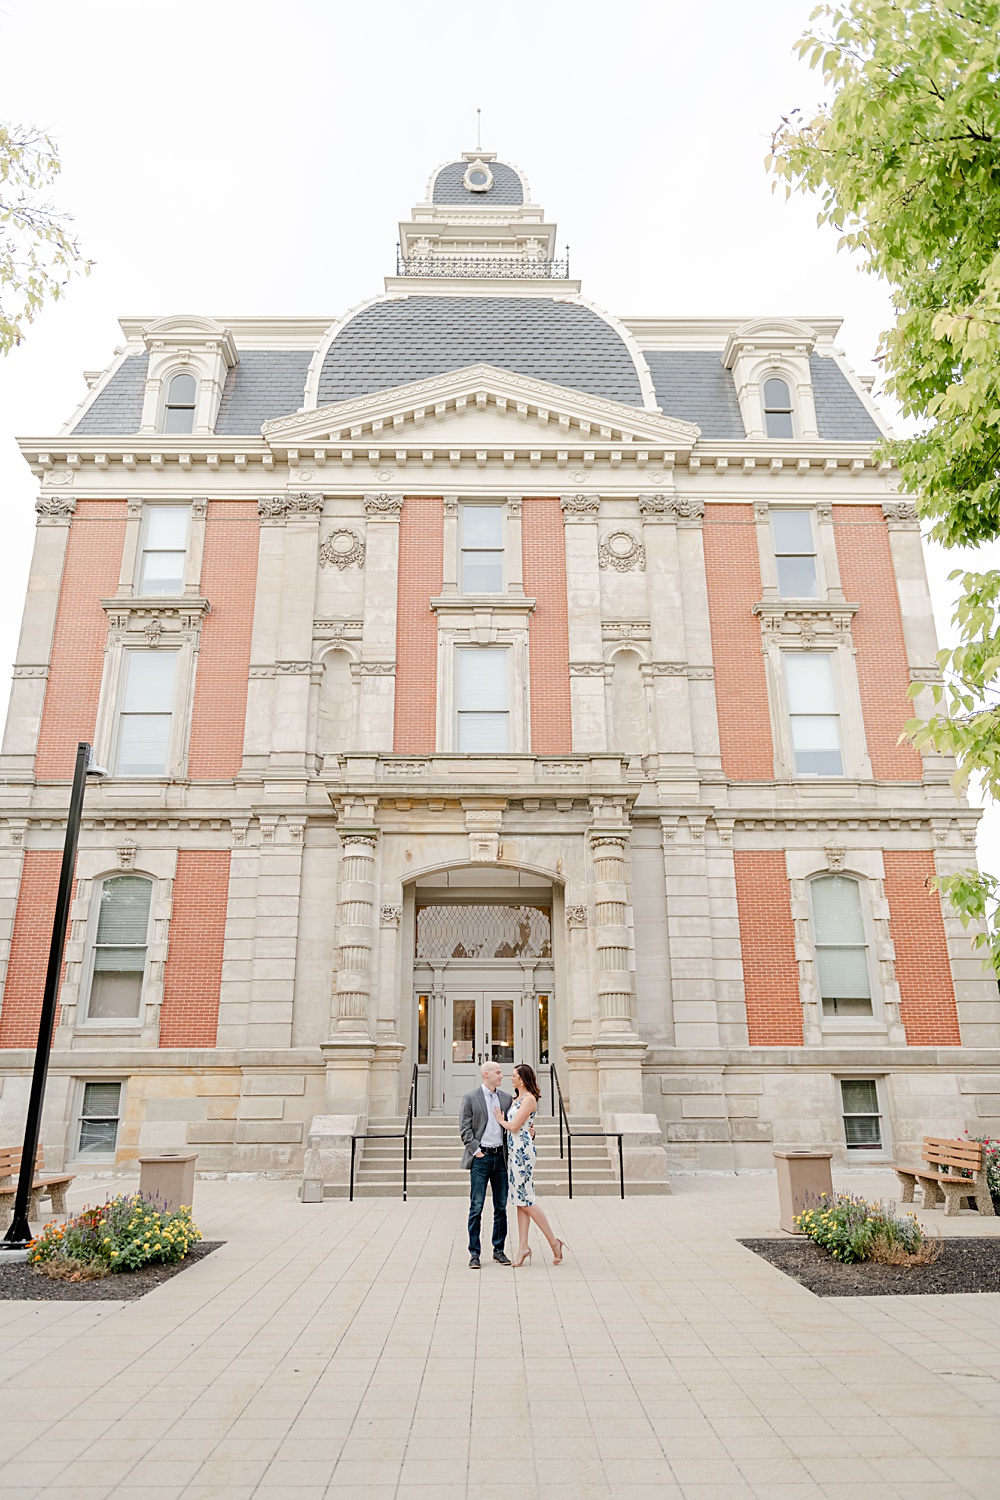 Couple sharing a romantic kiss in front of historic building.